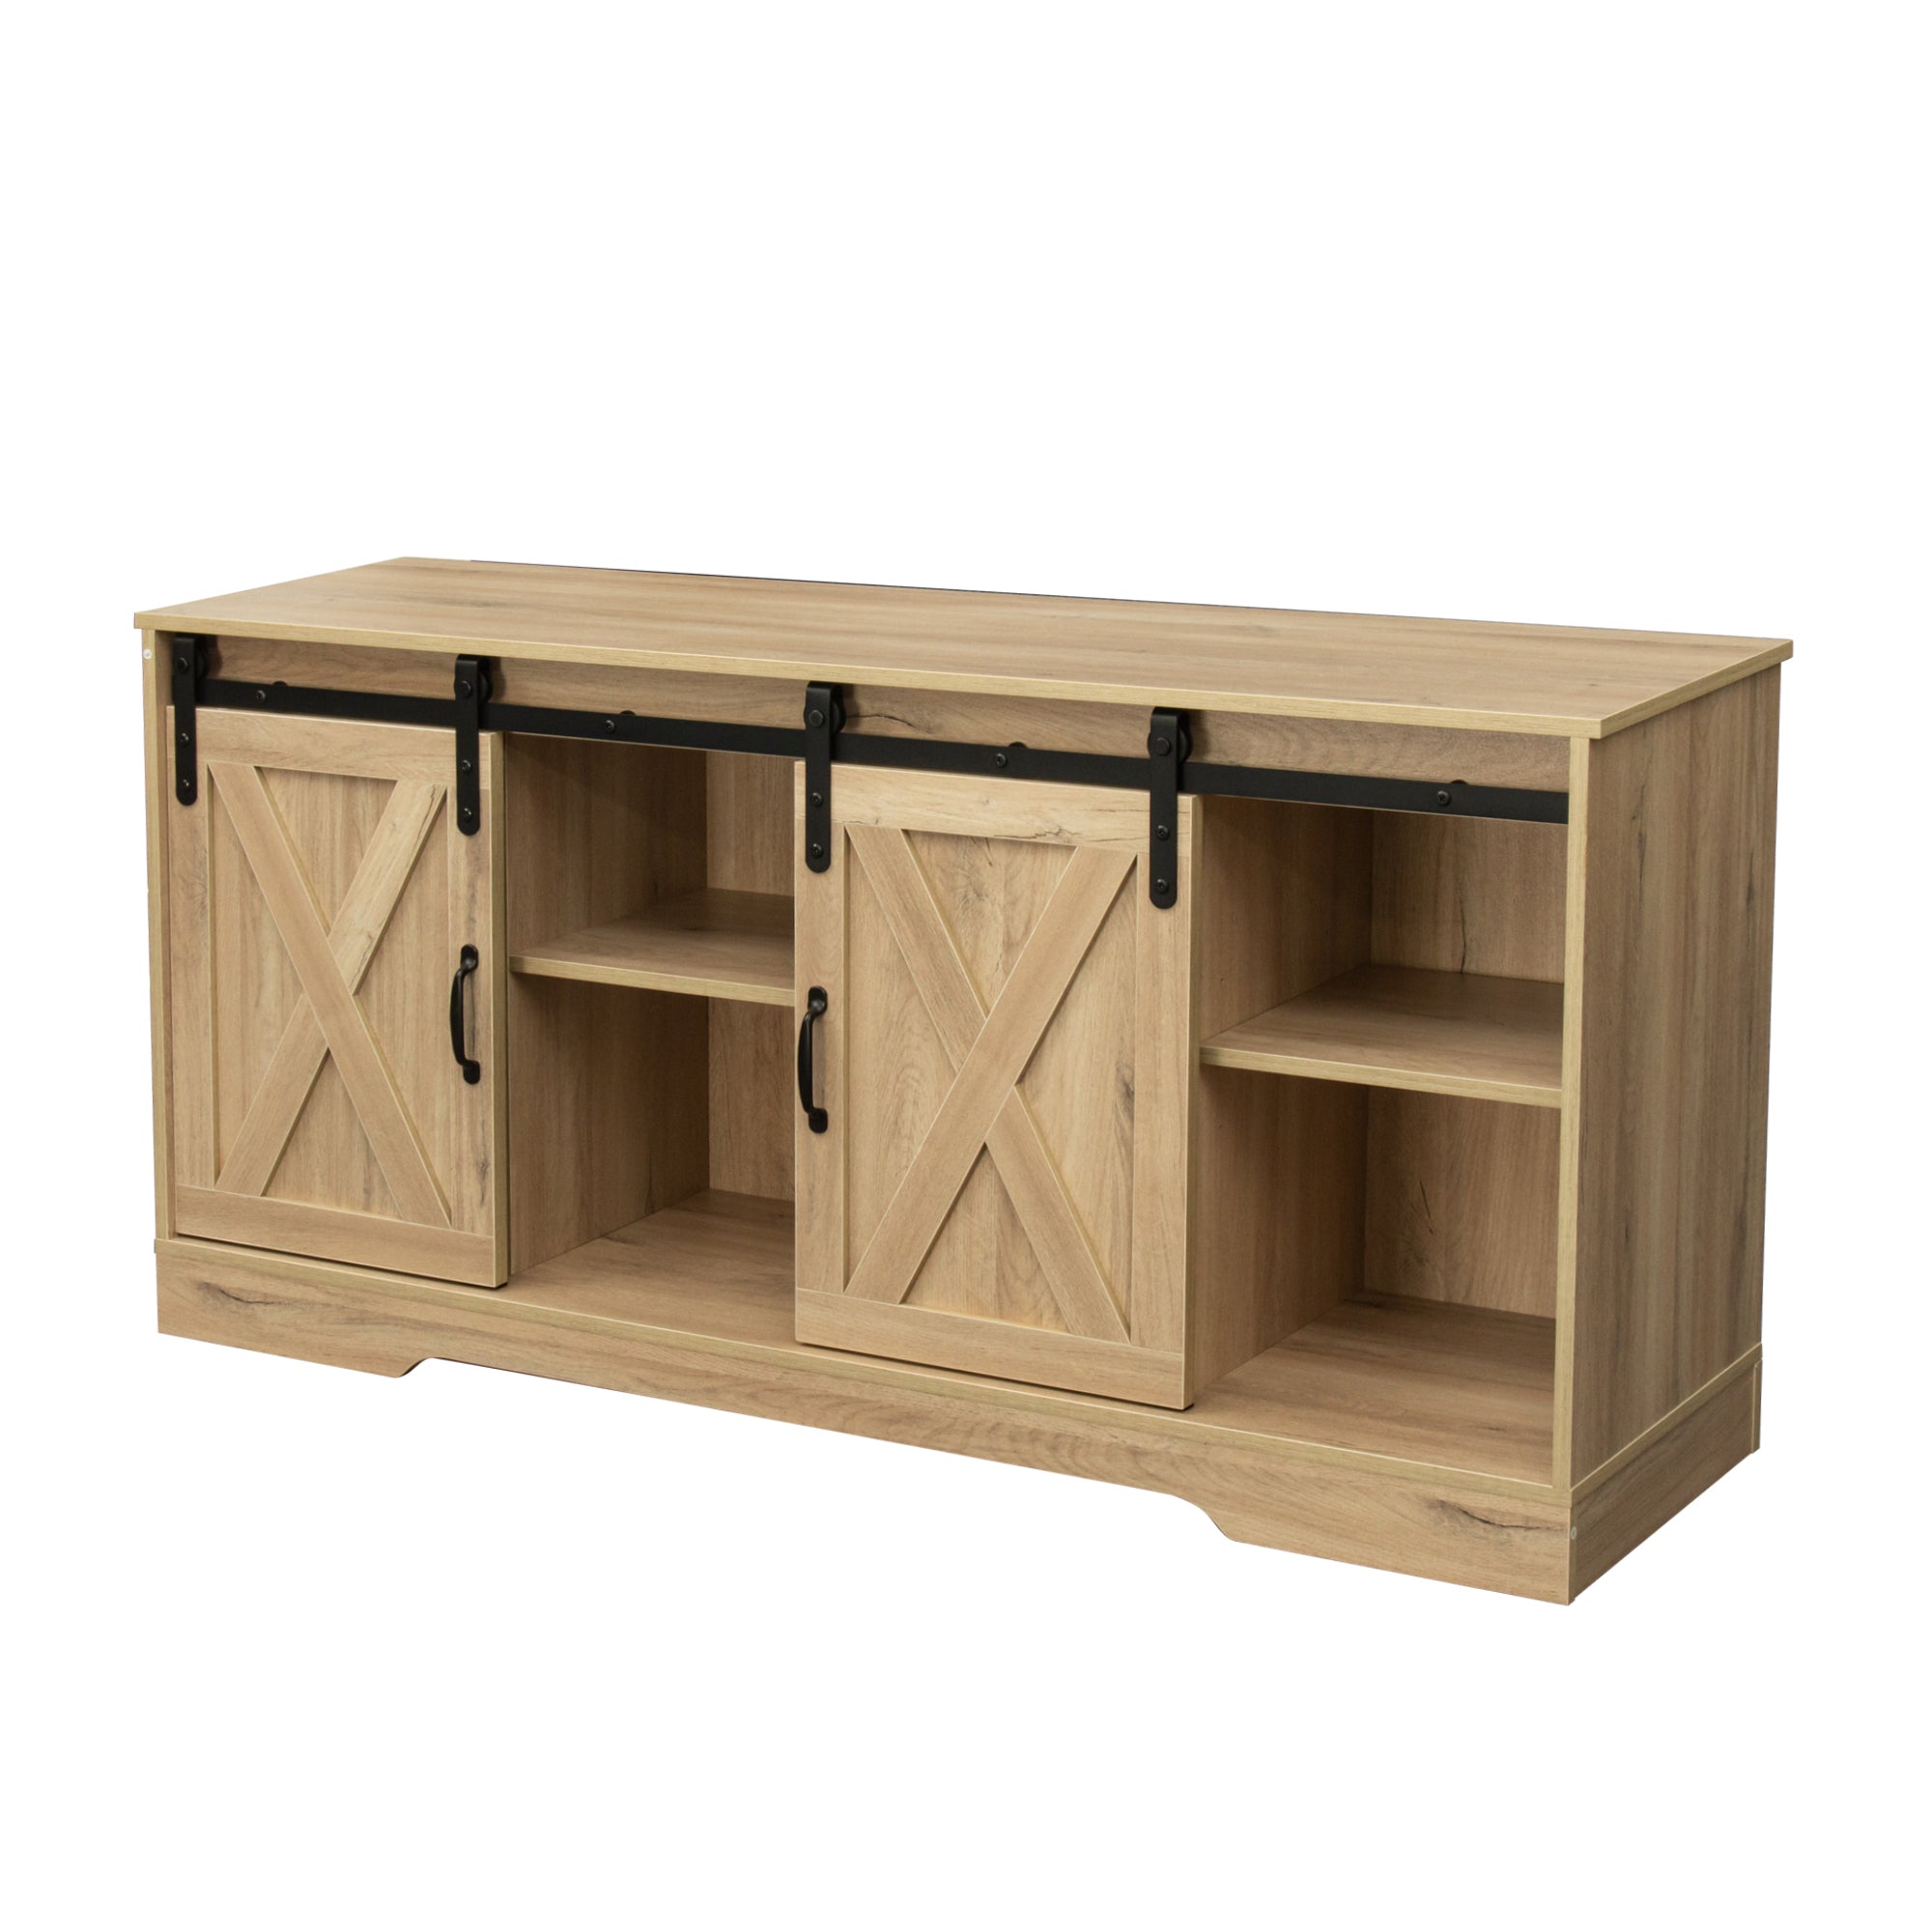 Modern & Farmhouse Wood TV Stand with Sliding Barn Doors for TVs Up to 65", Oak